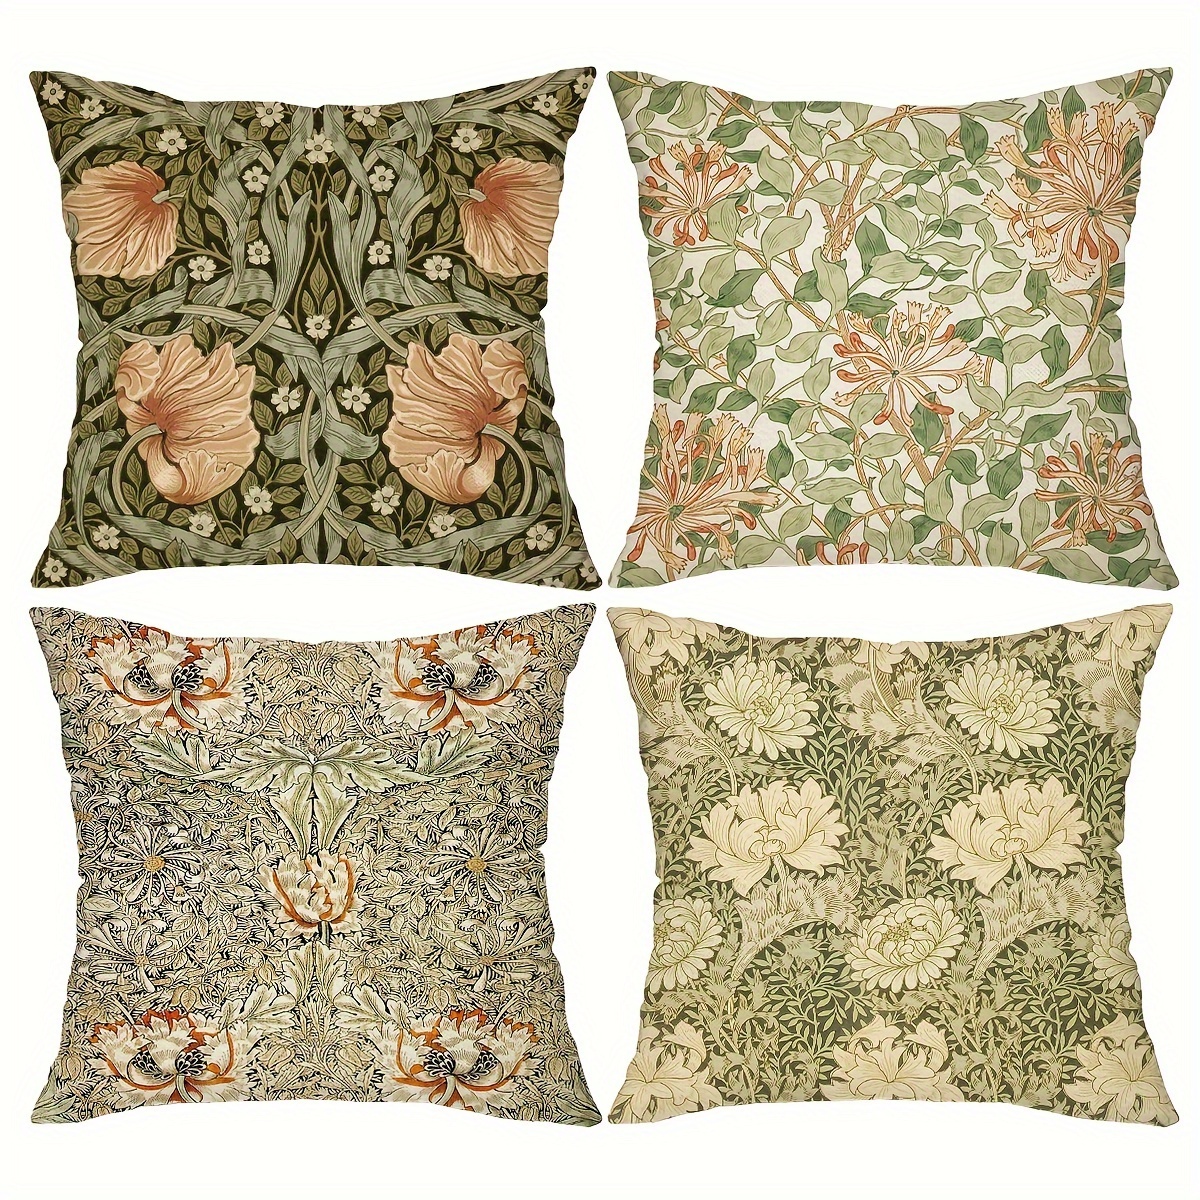 

4pcs, William Morris Florals Throw Pillow Covers, 18in*18in, Vintage Florals Decoratifile Cushion Covers, Home Decor For Sofa Bedroom Office Car Farmhouse, Without Pillow Cores.